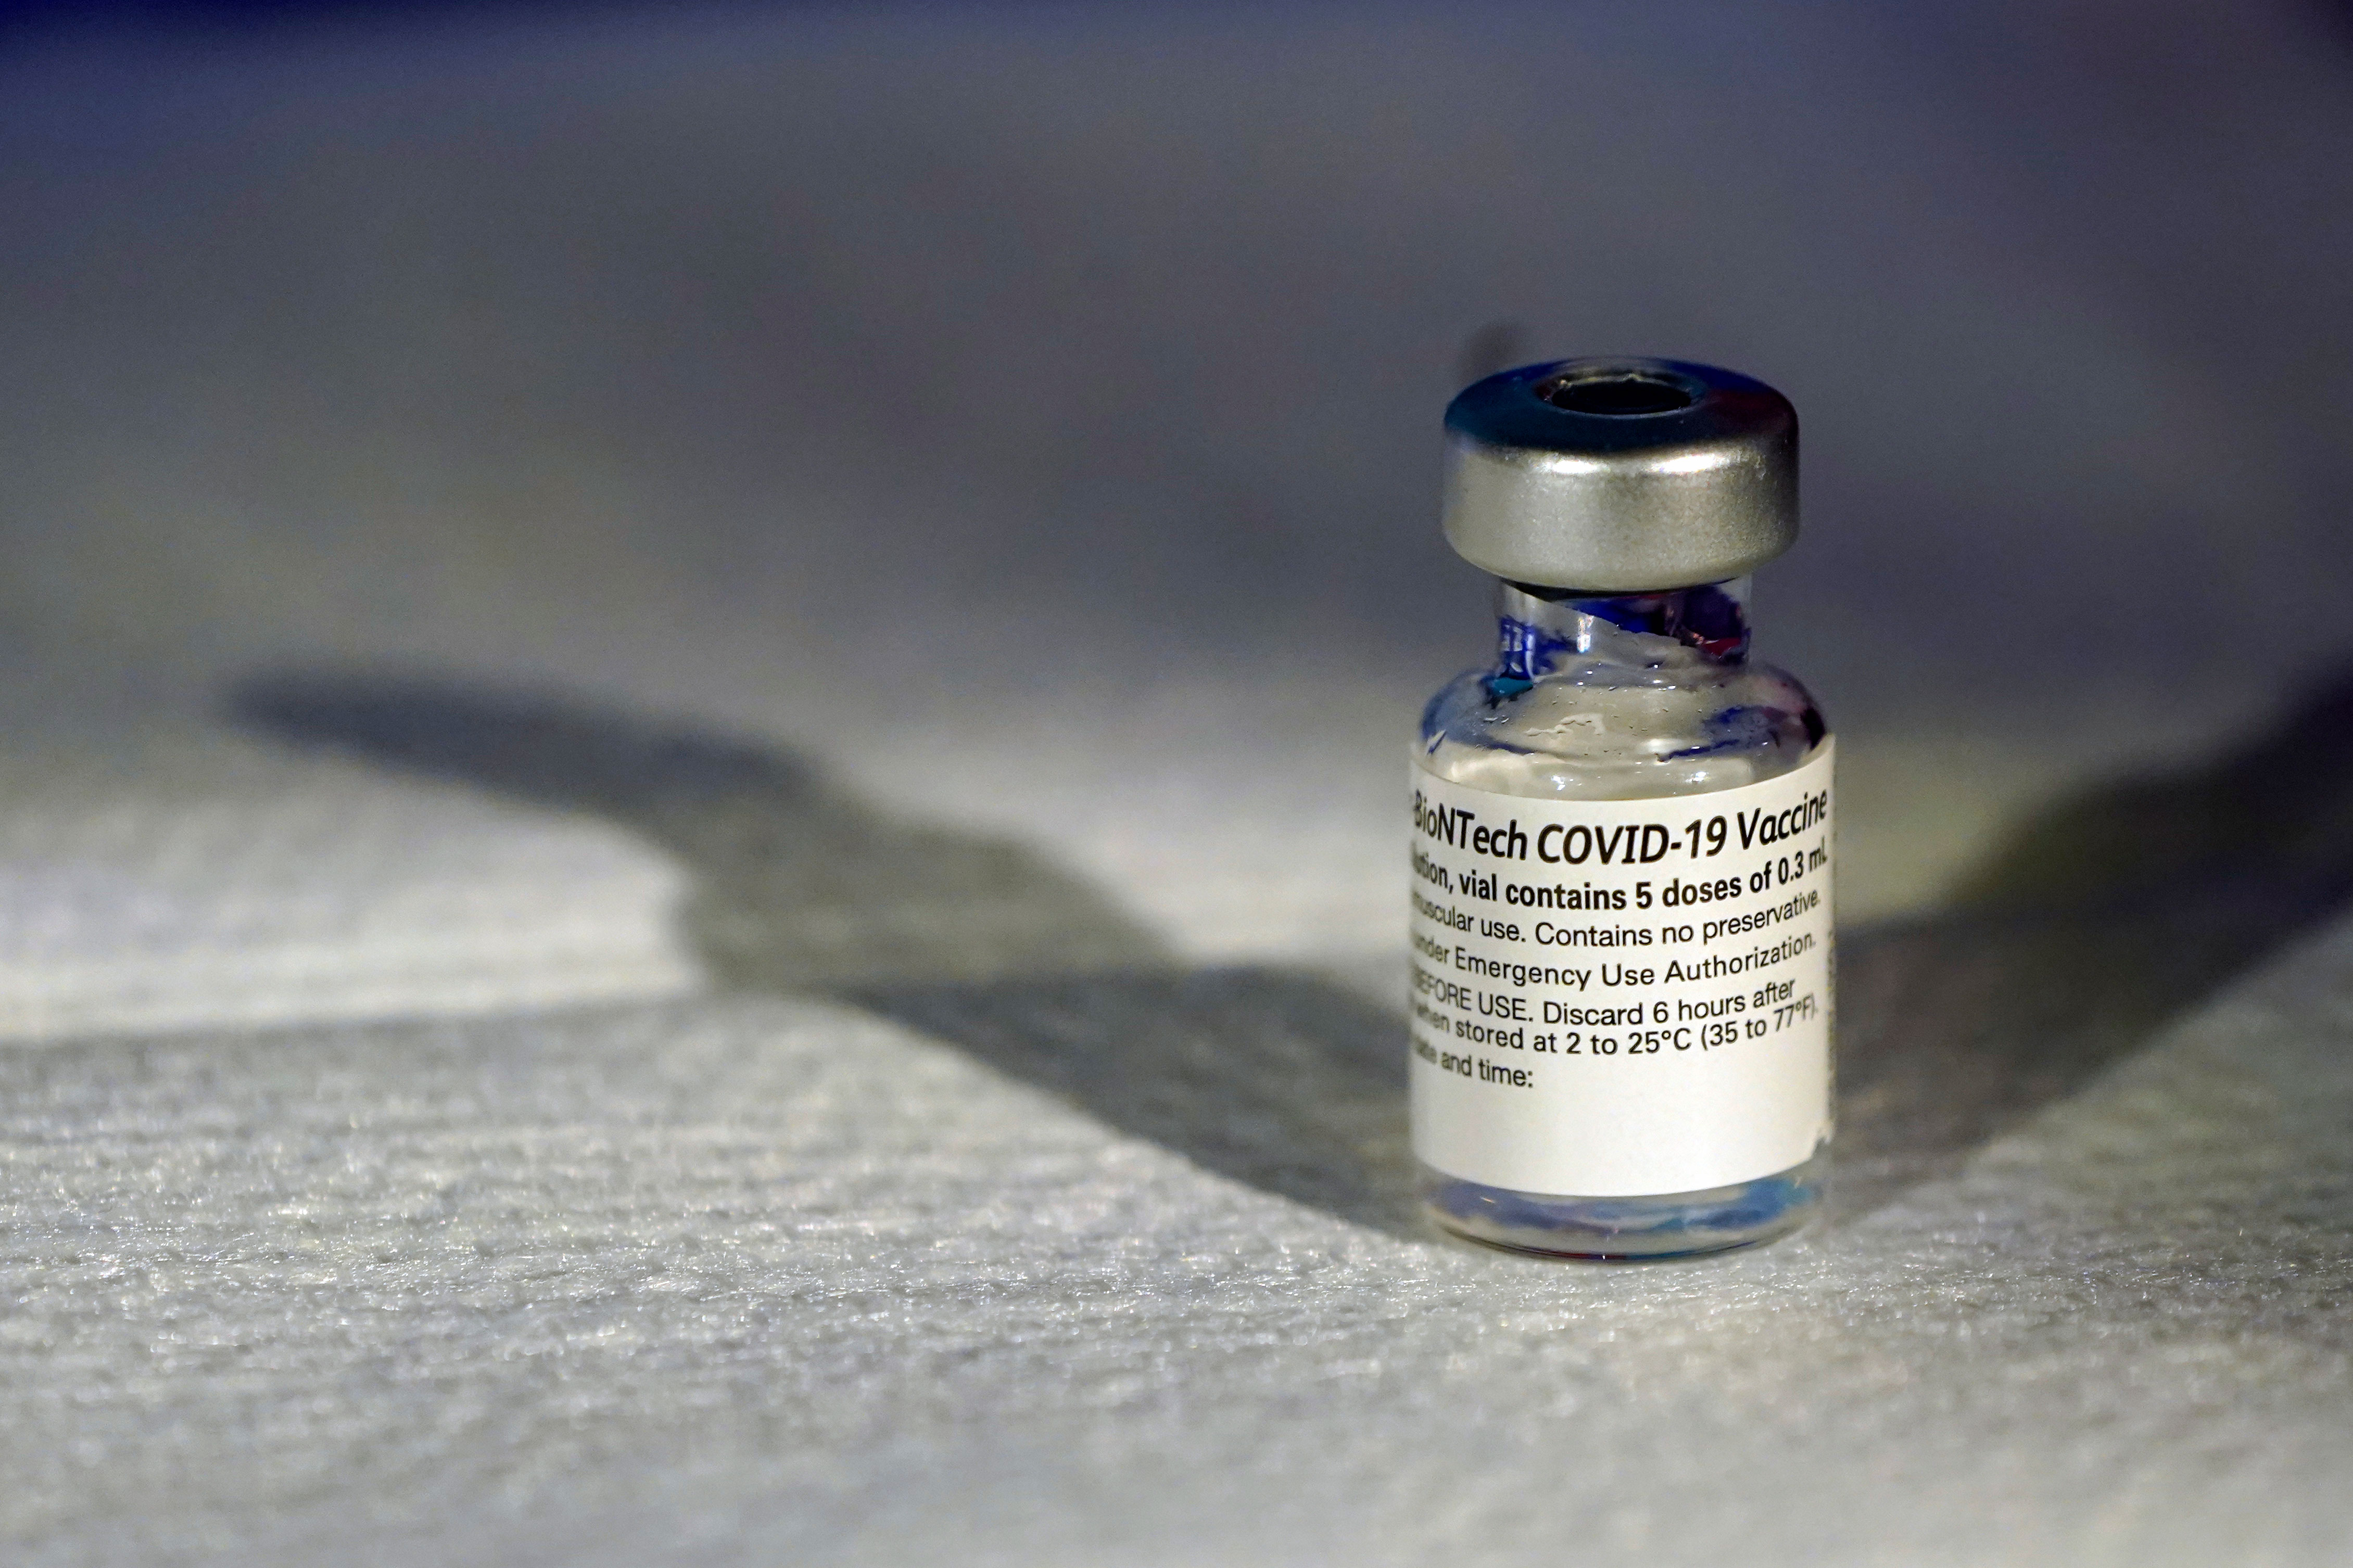 A vial of the Pfizer/BioNTech Covid-19 vaccine in Washington, DC, in December 2020.